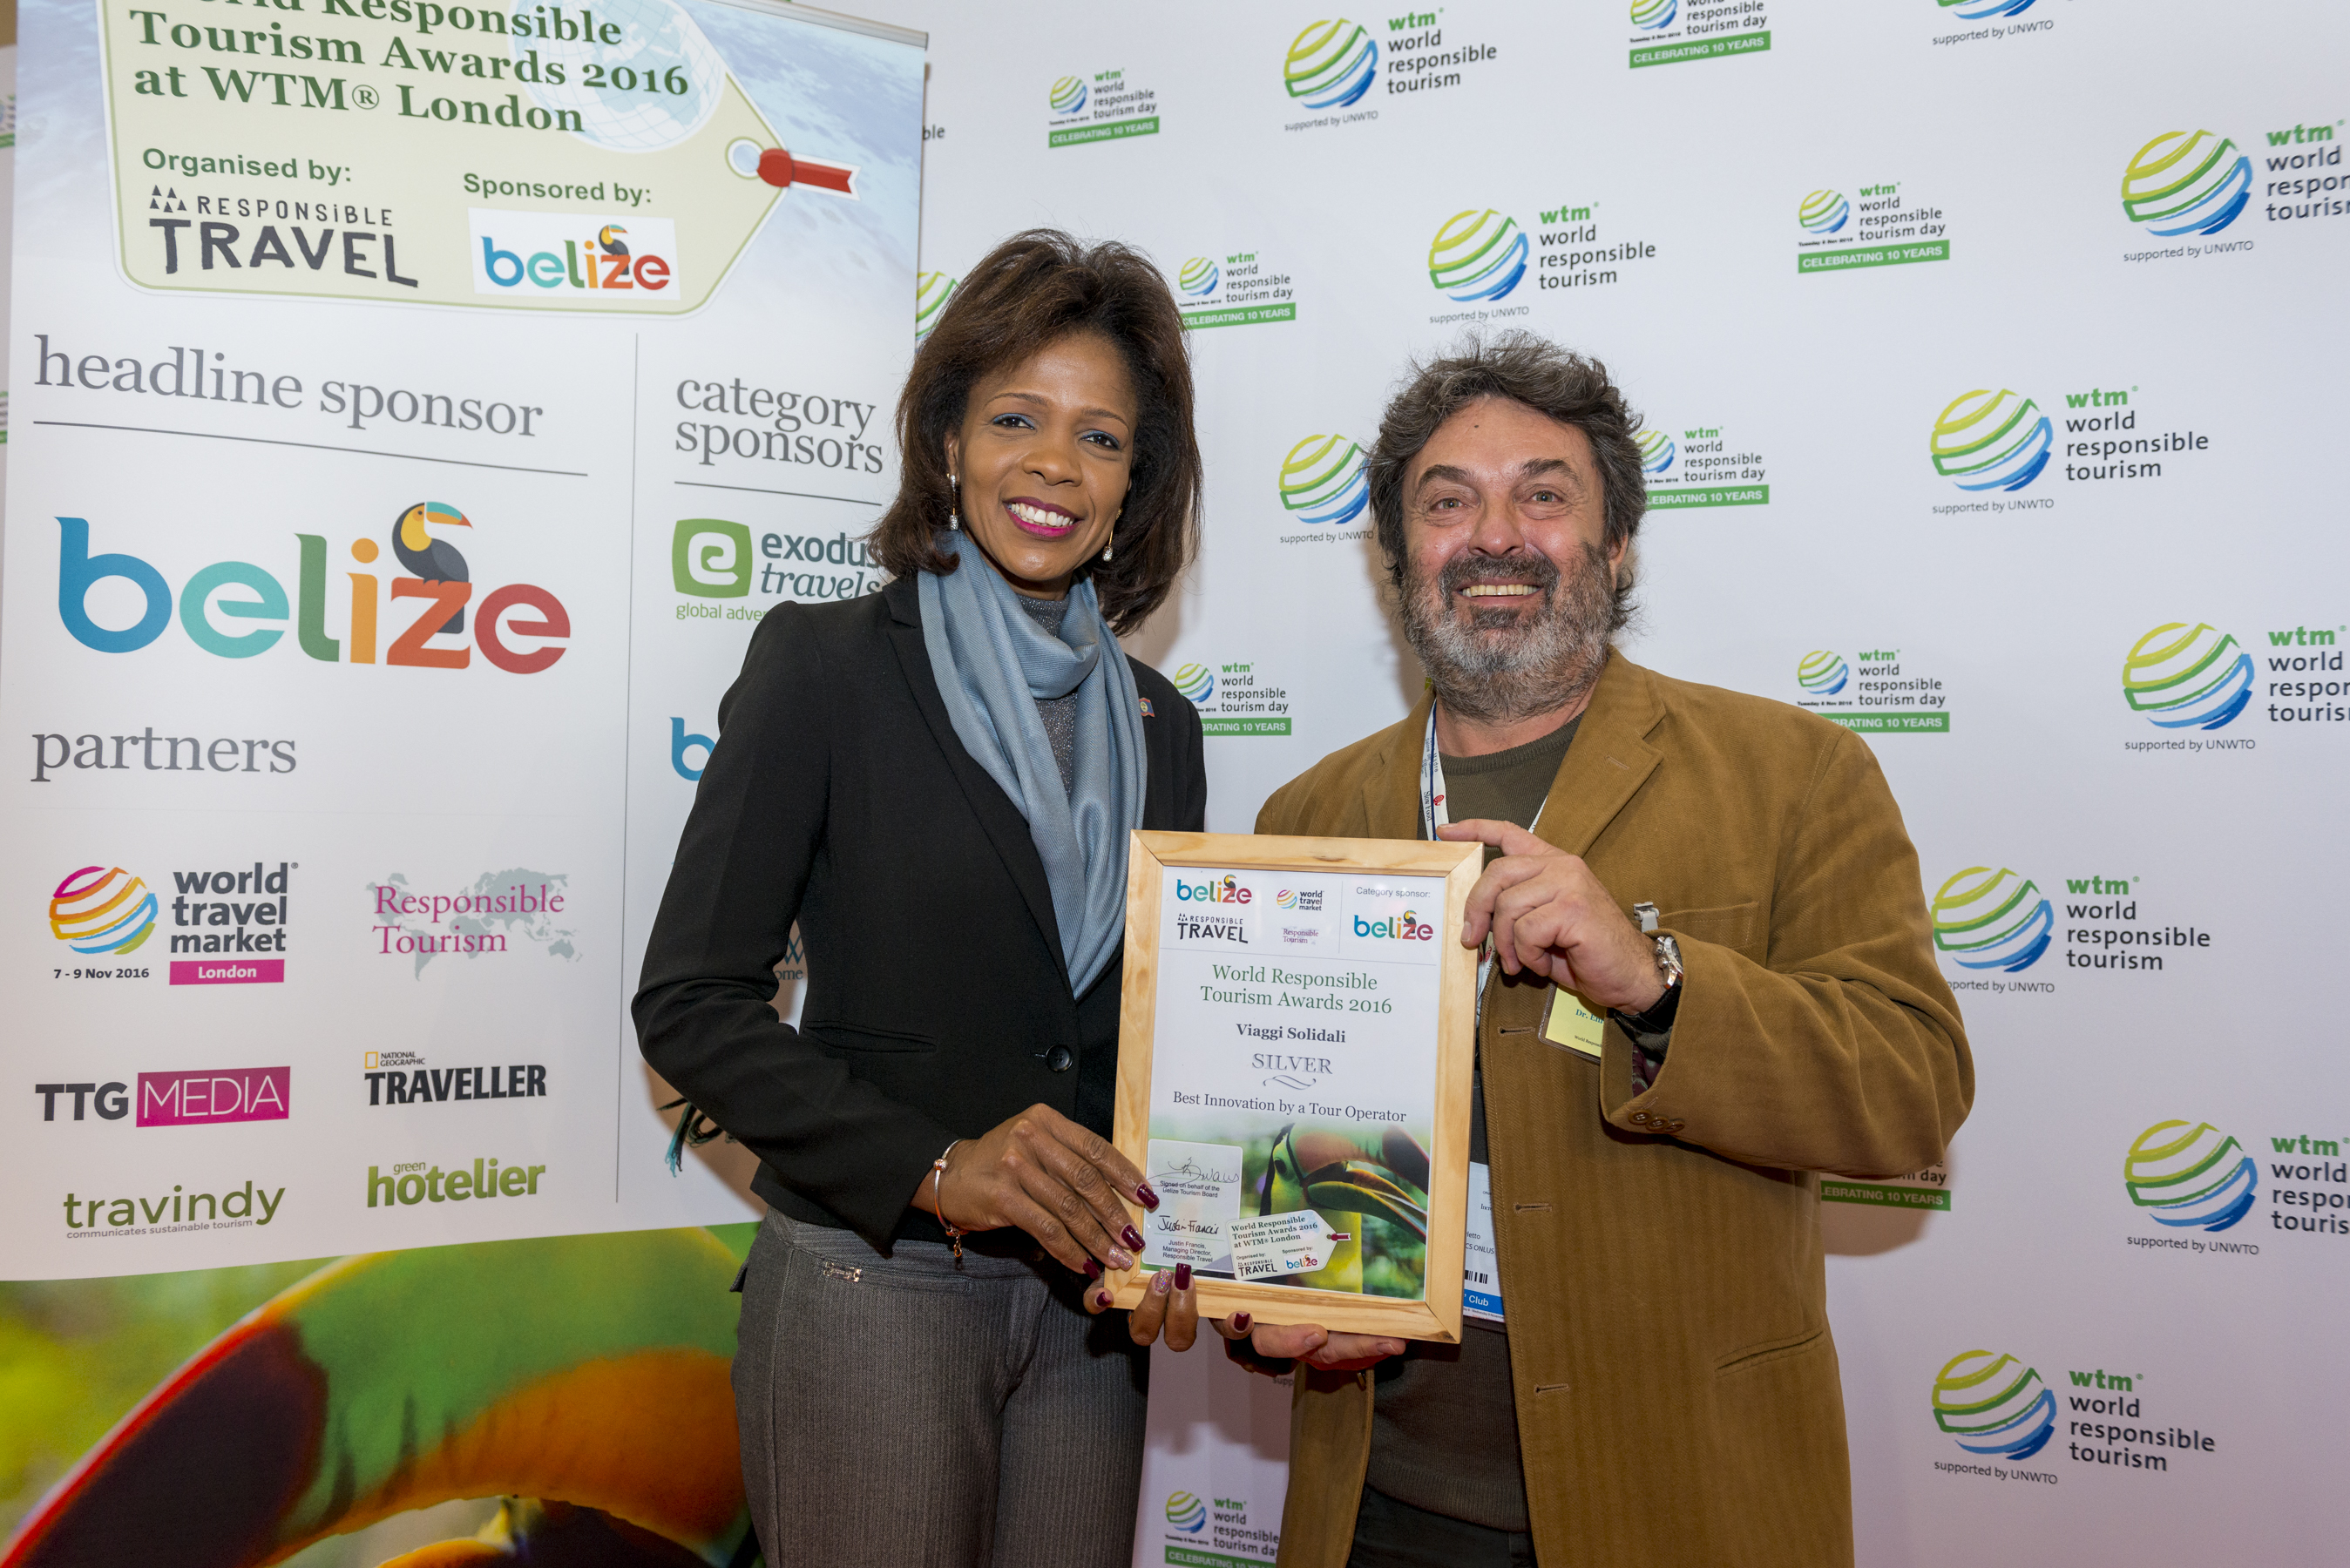 Migrantour wins the Silver Medal at the World Responsible Tourism Award 2016